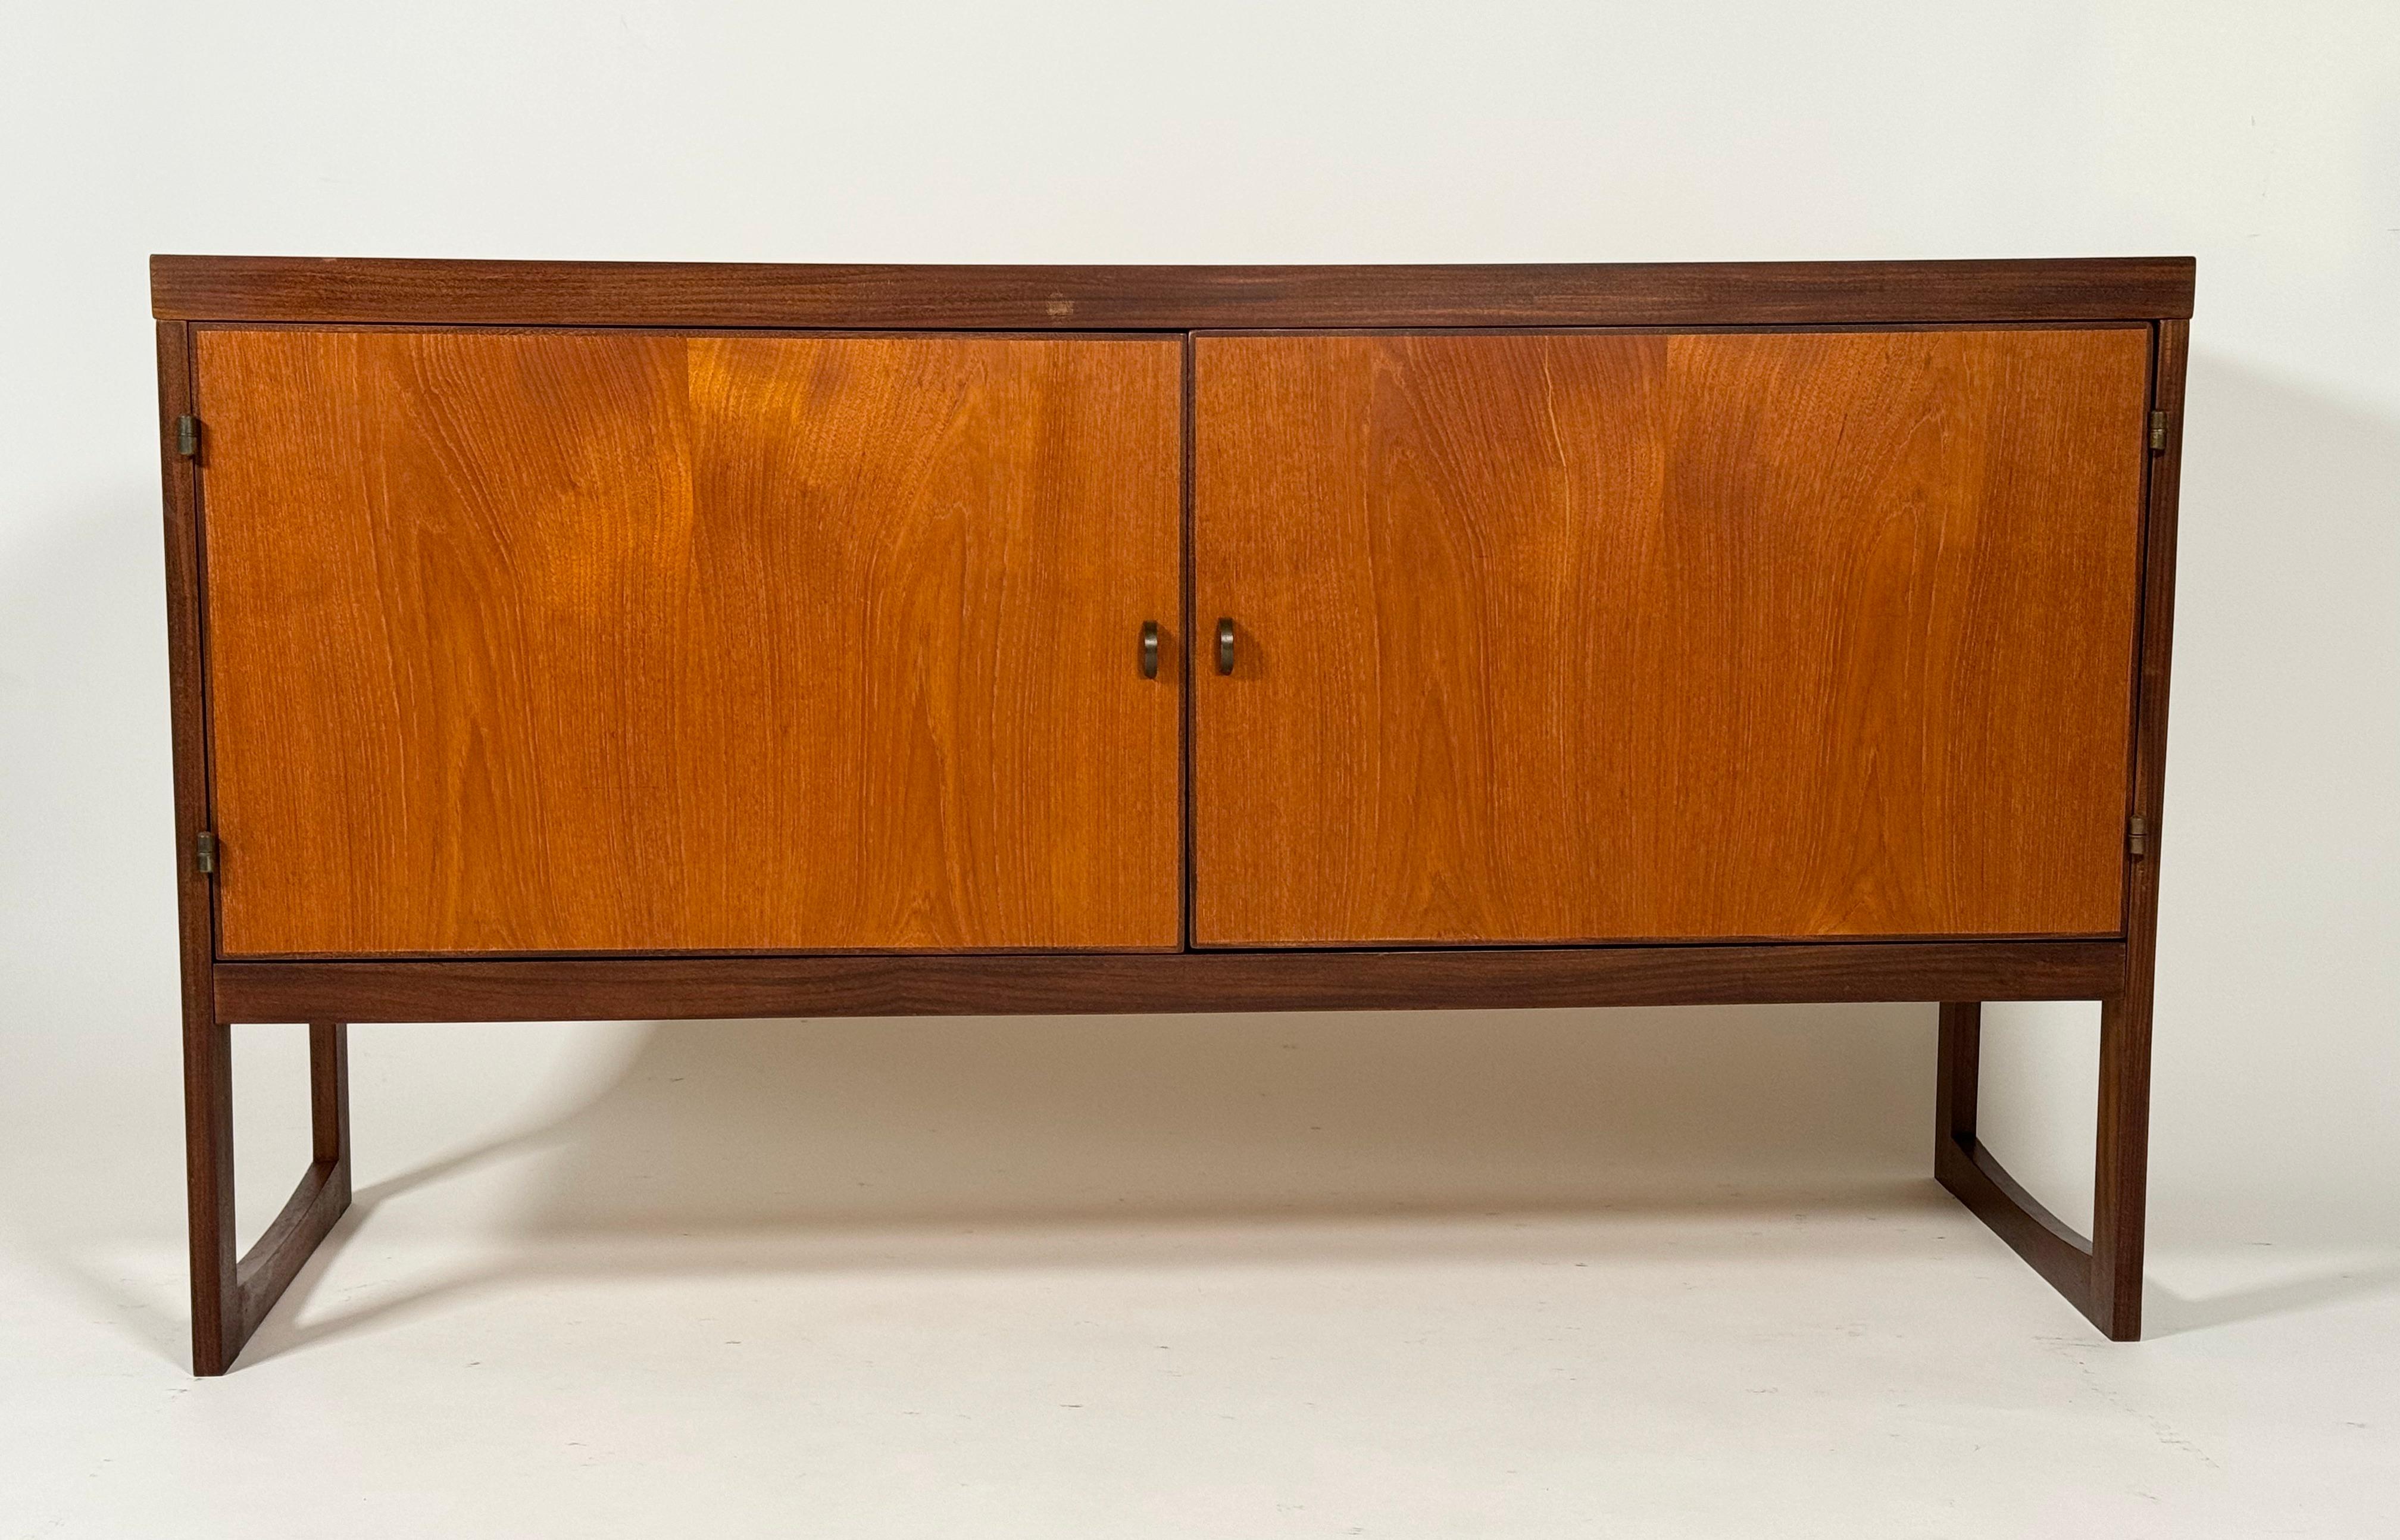 Compact Hans Olsen teak and birch sideboard with one adjustable with an birch lined interior. Curved brass hardware for the pulls and hinges. Having an angular form with squared off legs going into the body of the case good. The warmth of wood with